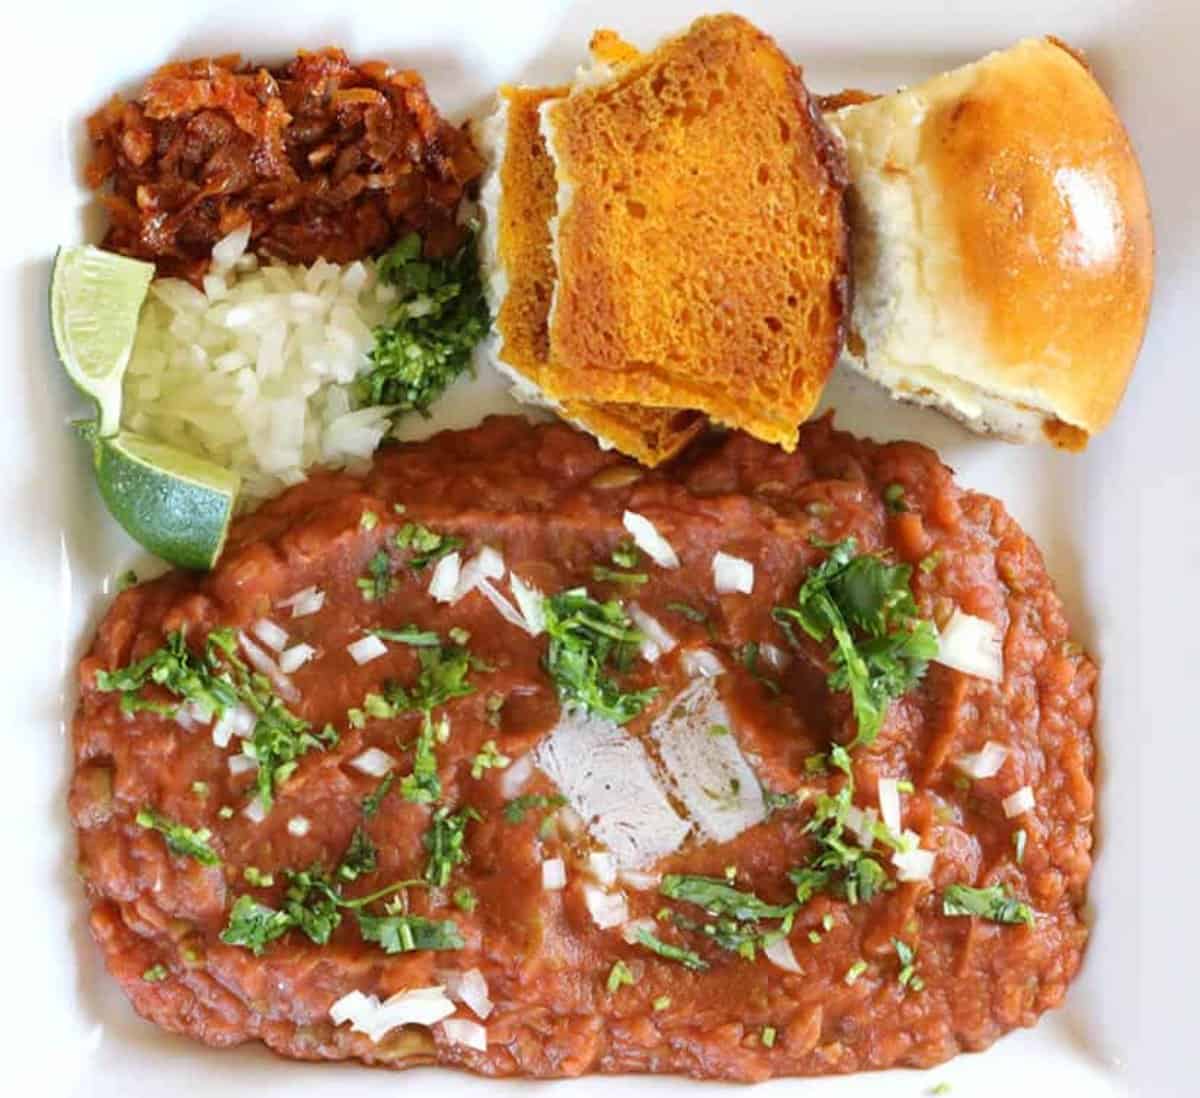 Quick and Delicious Street-style Pav Bhaji Recipe at home.